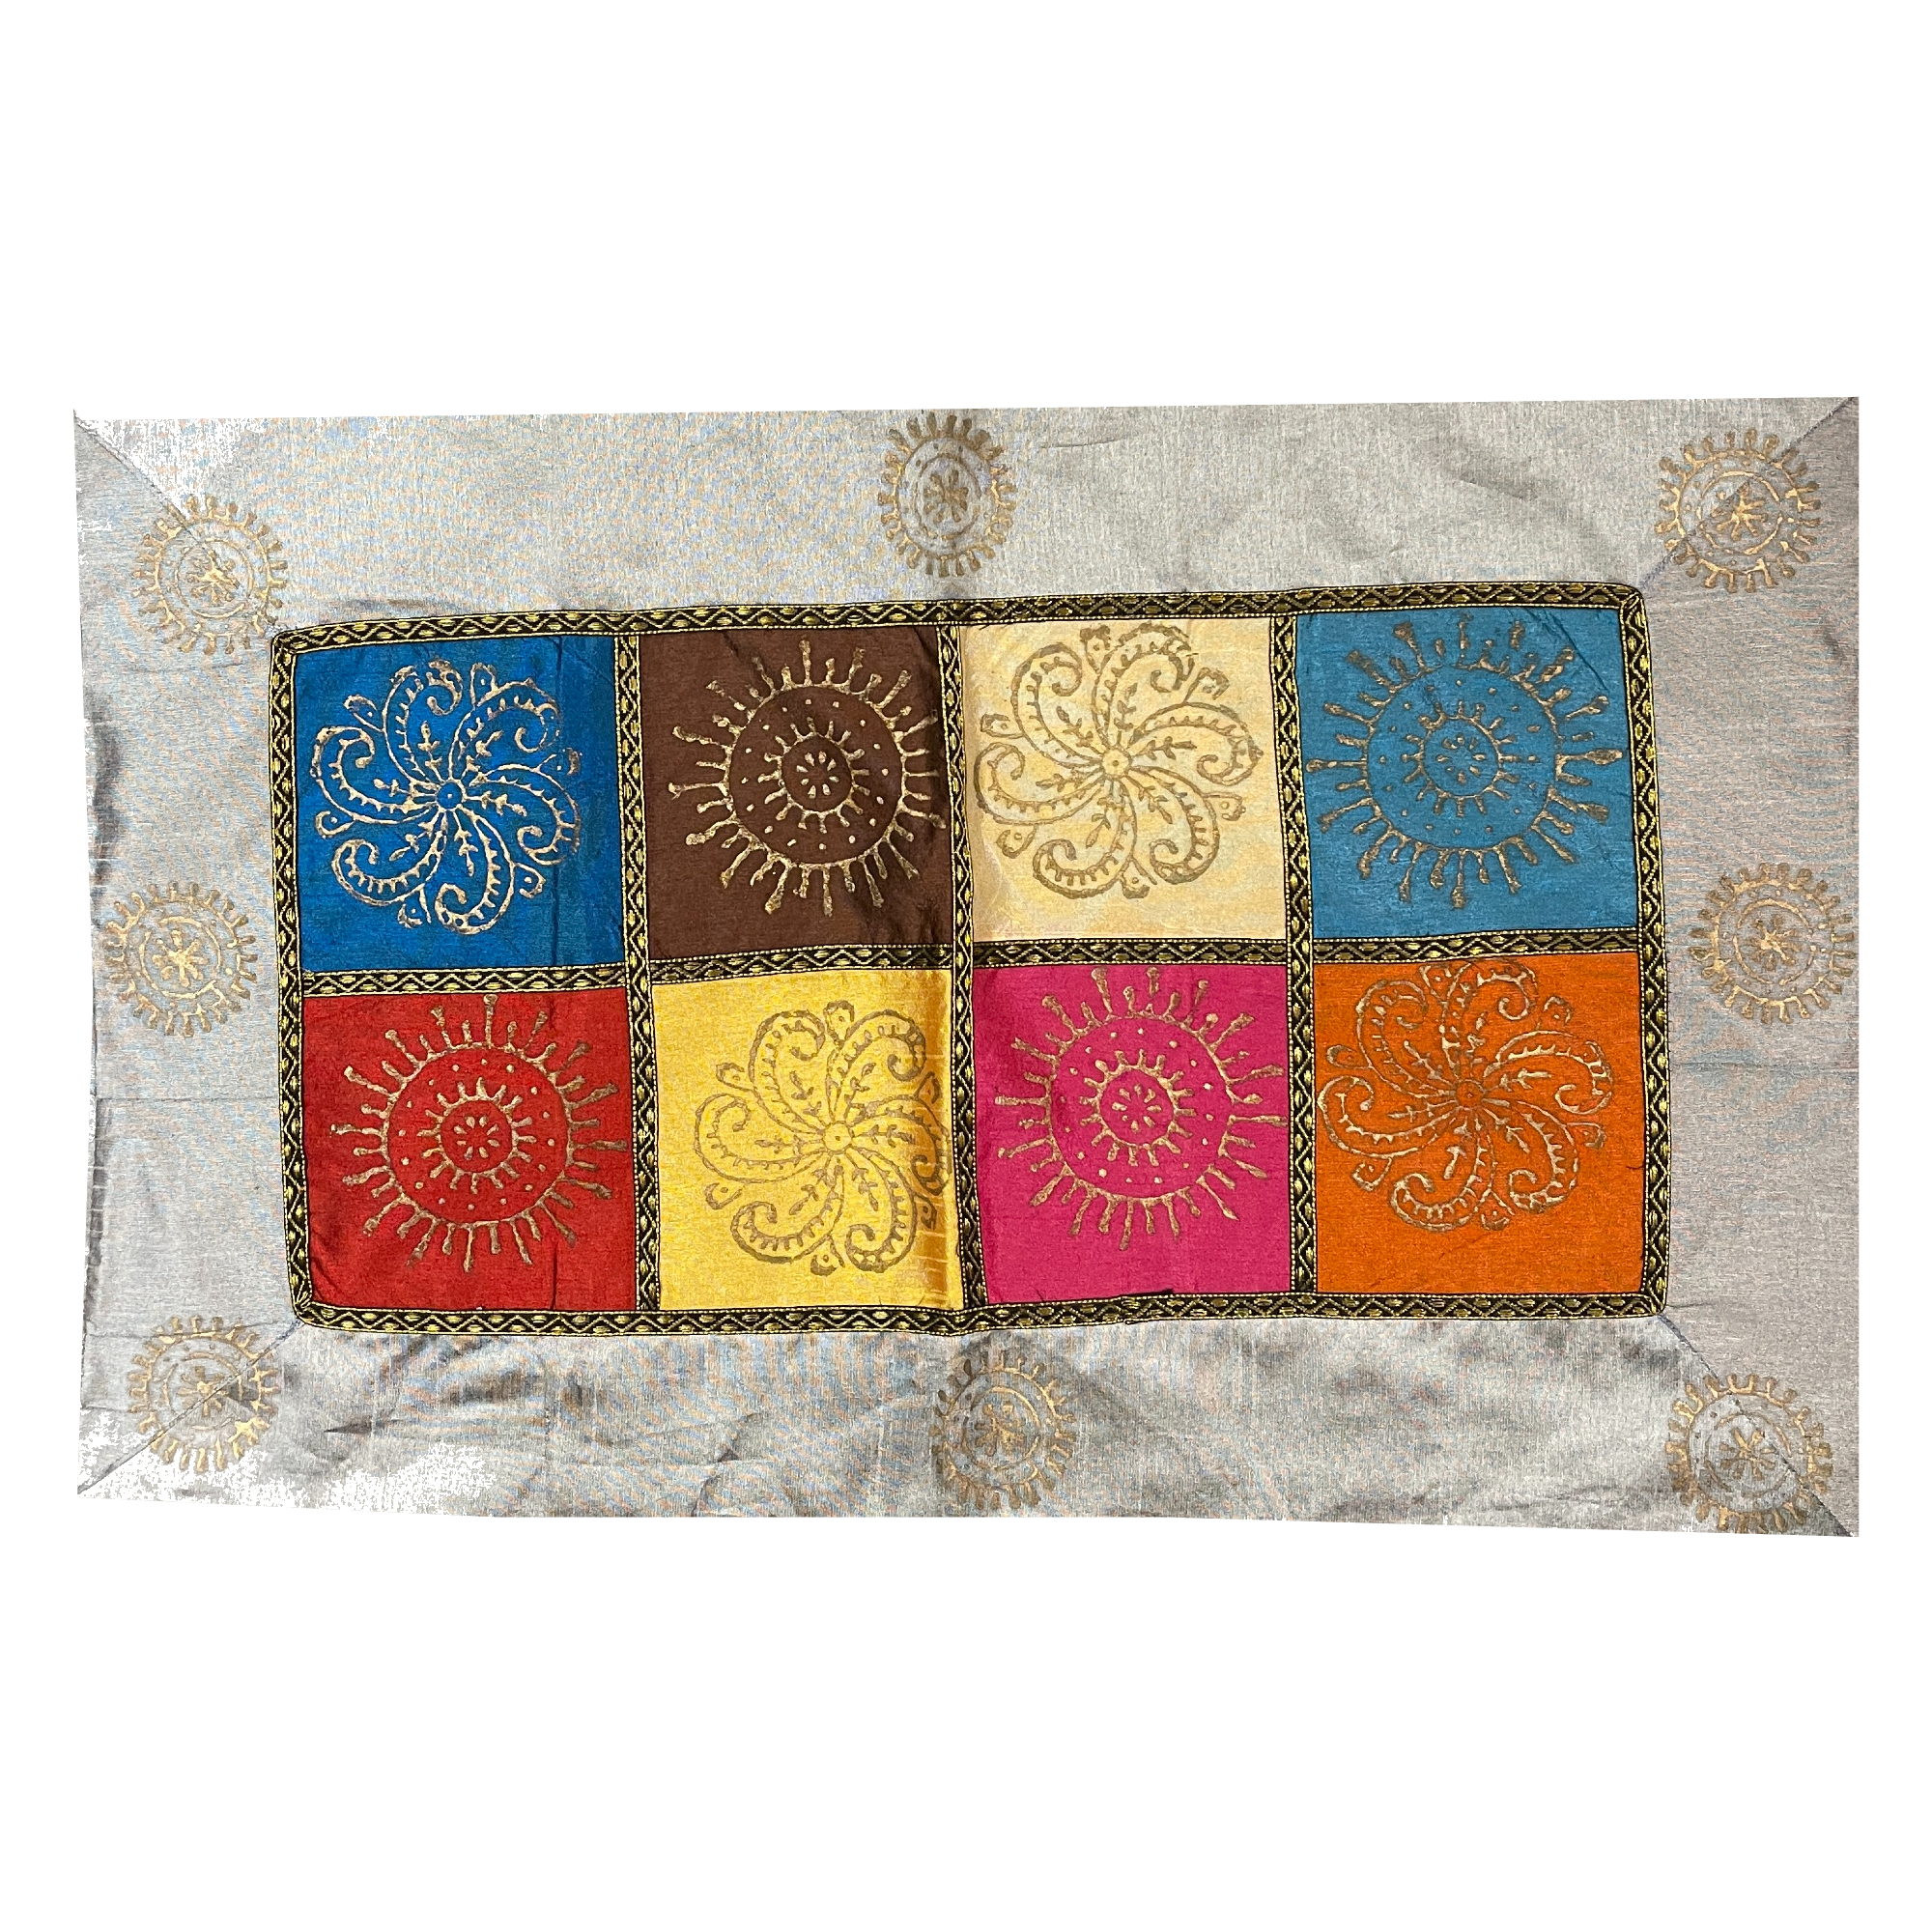 Silver Pillow Covers With Golden Block Prints - 4 Styles - Vintage India NYC